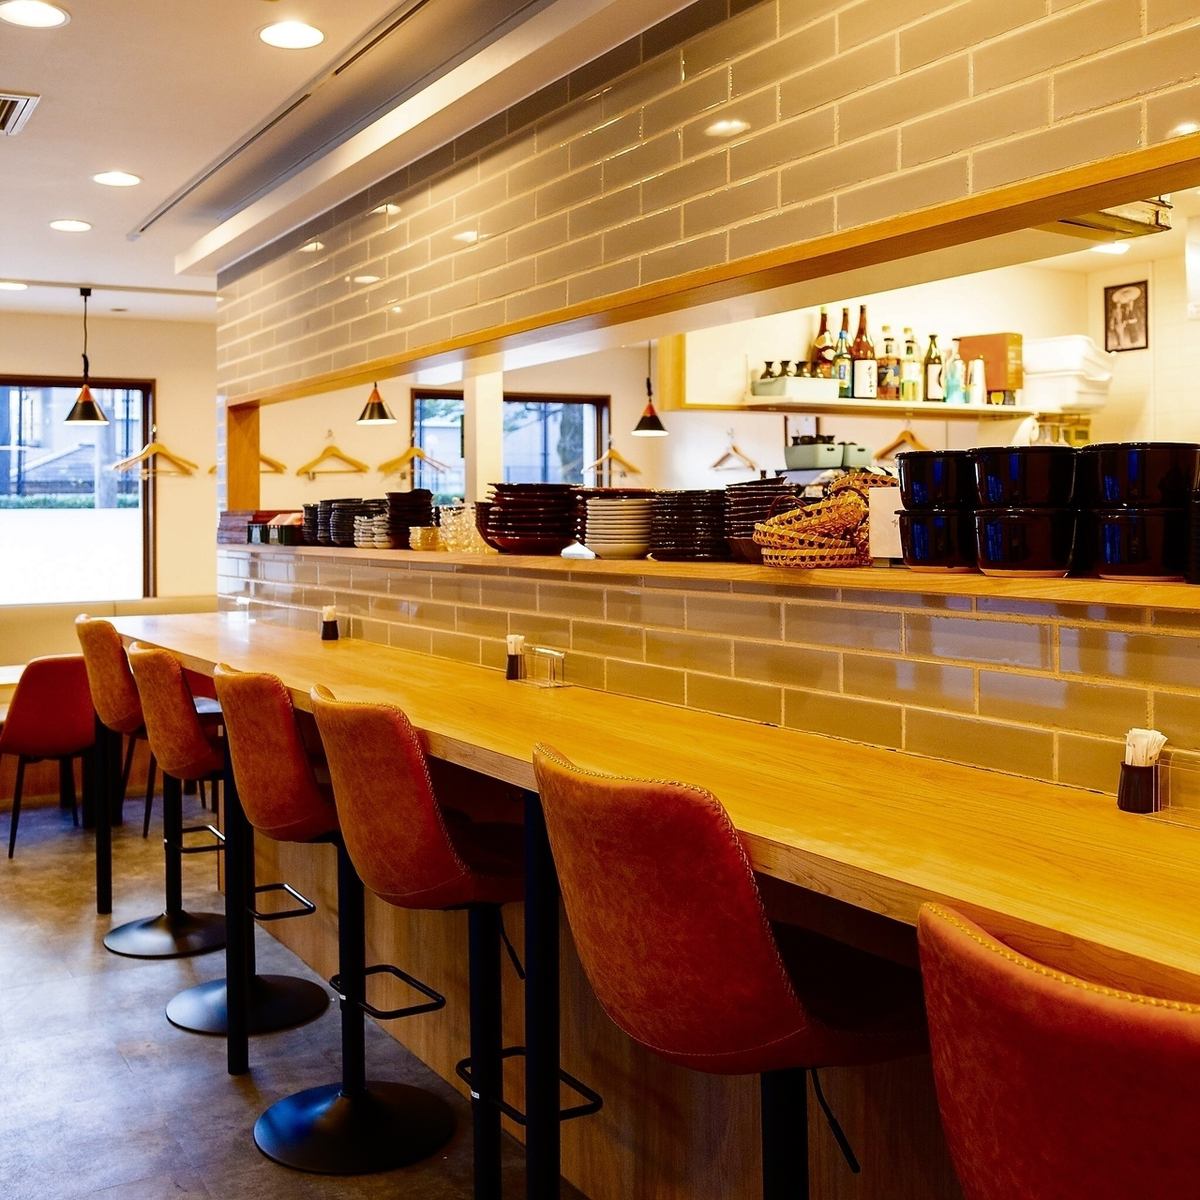 The counter seats are very popular with couples, and the restaurant has a fun atmosphere surrounding the kitchen.